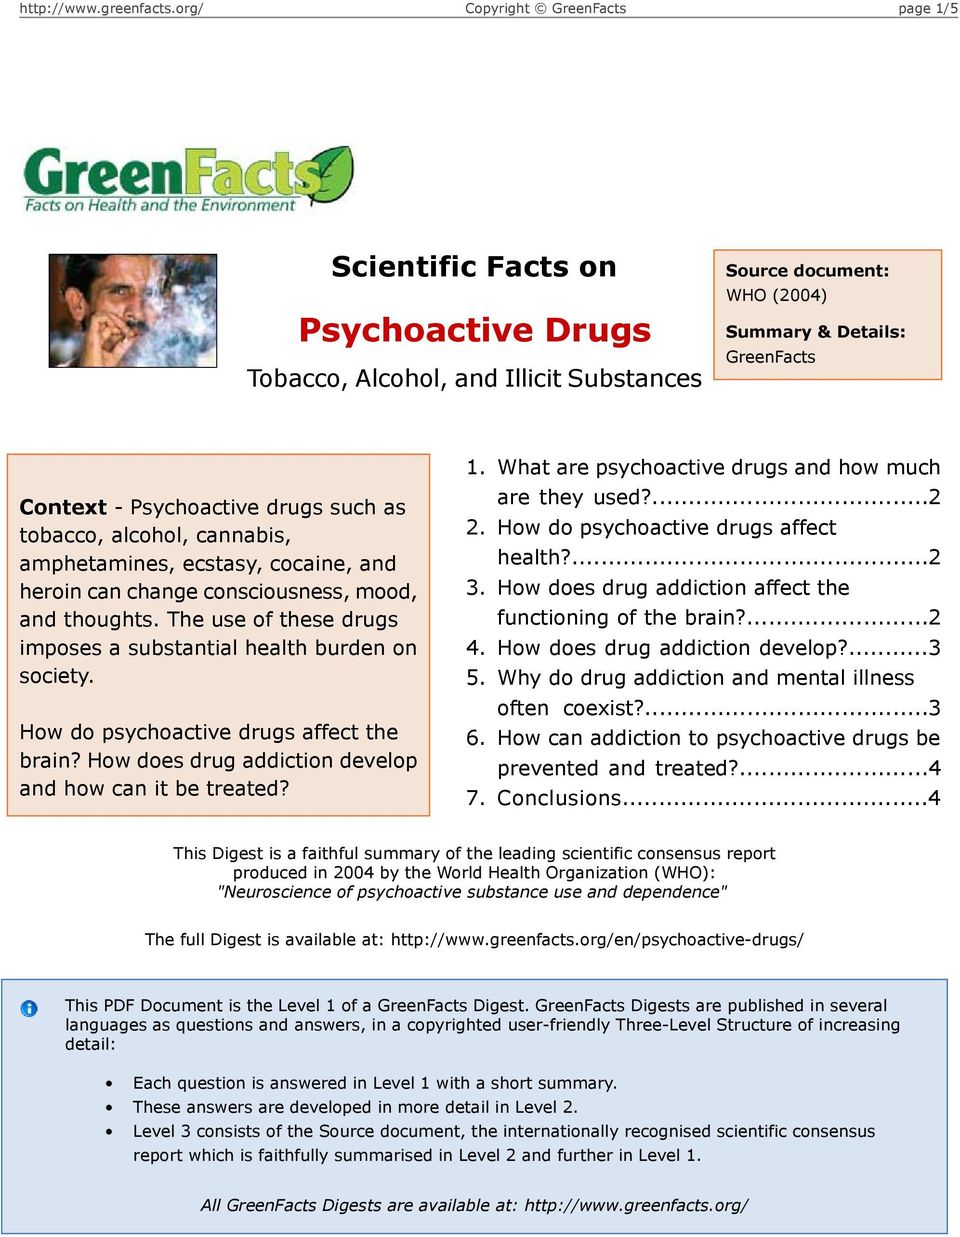 How do psychoactive drugs affect the brain? How does drug addiction develop and how can it be treated? 1. 2. 3. 4. 5. 6. 7. What are psychoactive drugs and how much are they used?